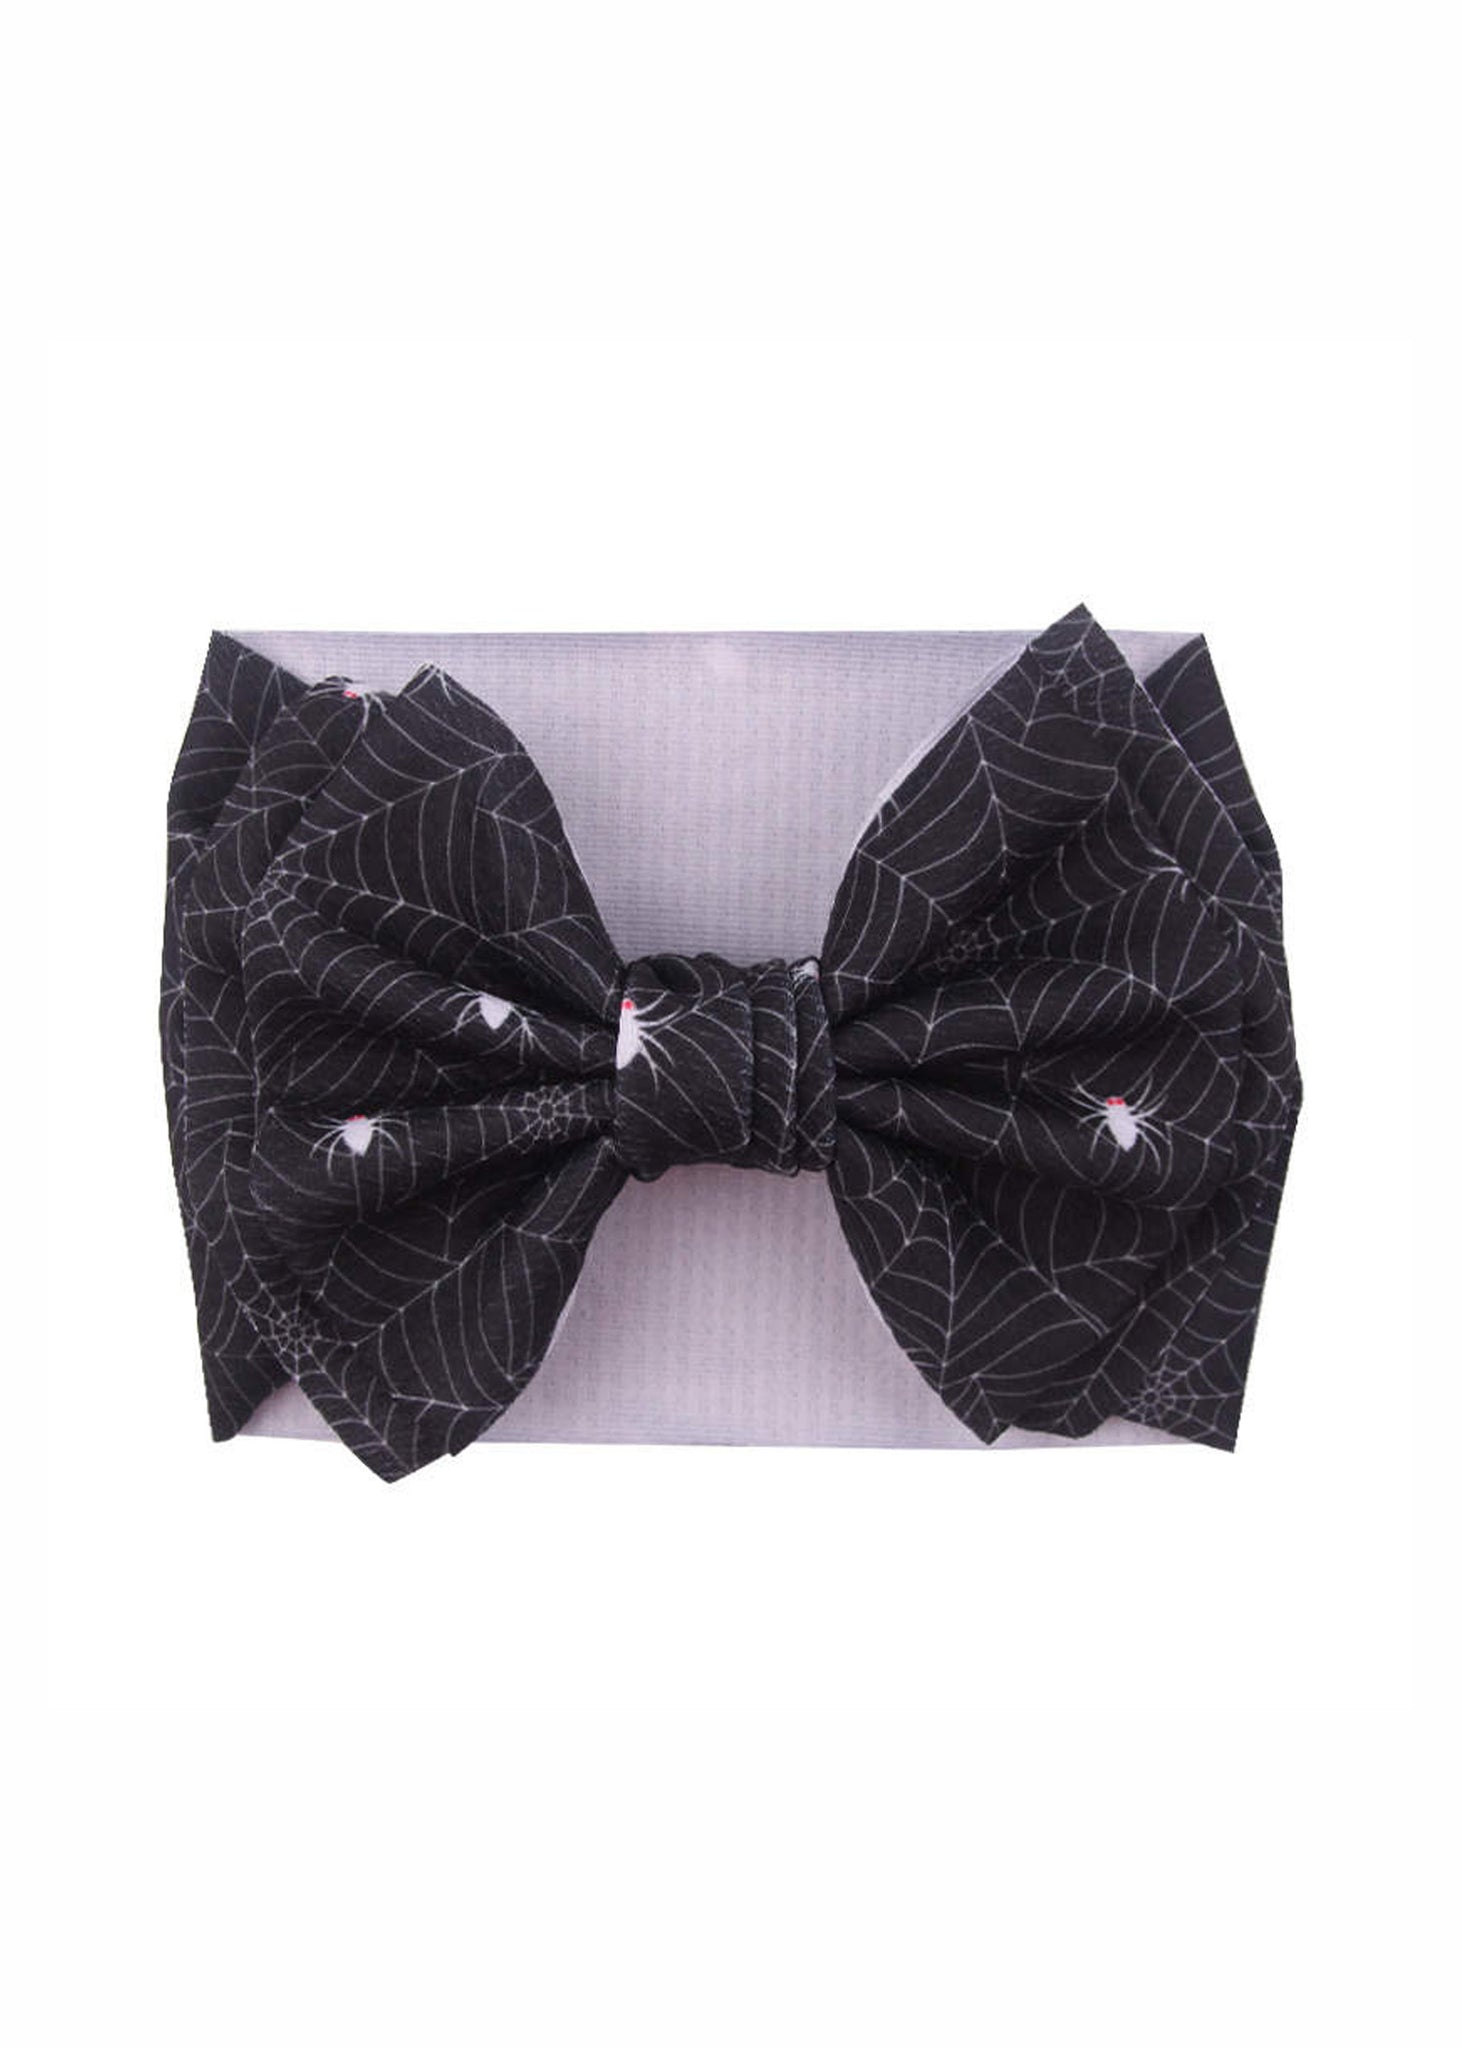 Baby/Toddler Bow Headband in Black Spider and Webs Print